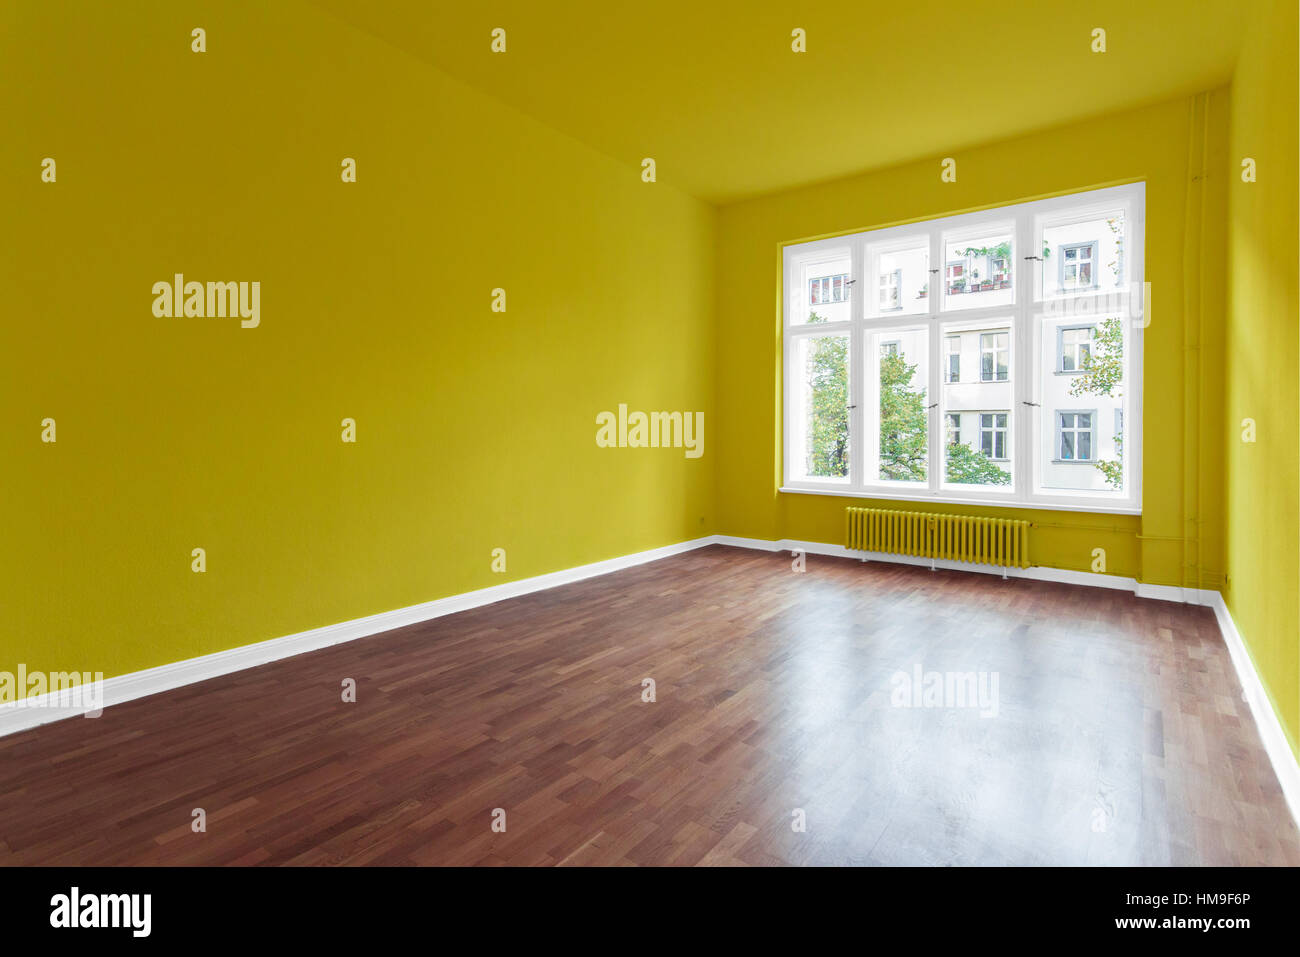 empty room with yellow walls and wooden floor Stock Photo